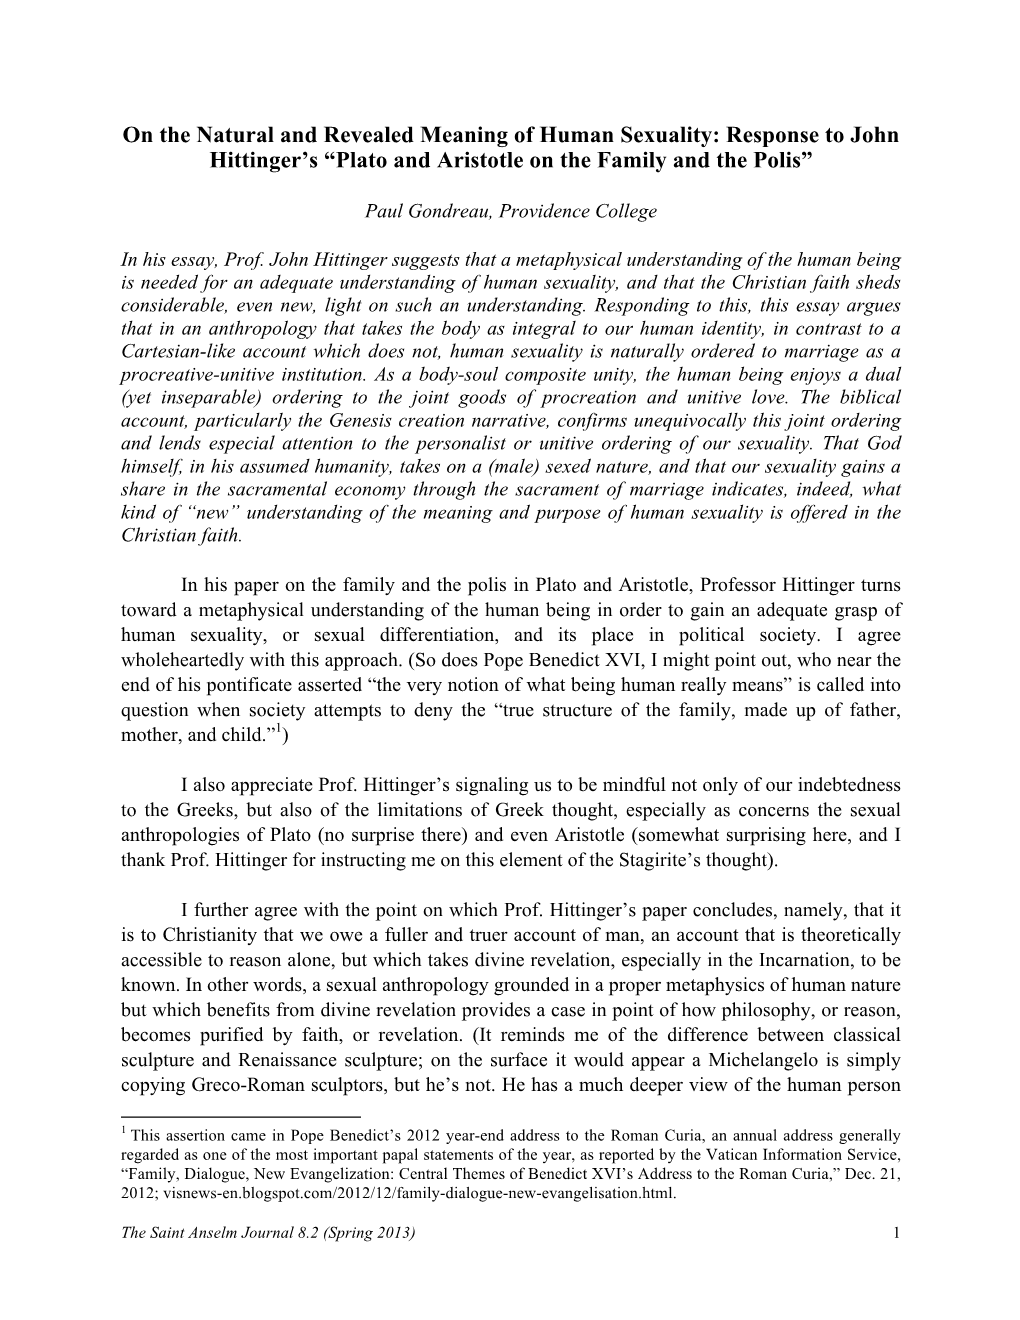 On the Natural and Revealed Meaning of Human Sexuality: Response to John Hittinger's “Plato and Aristotle on the Family